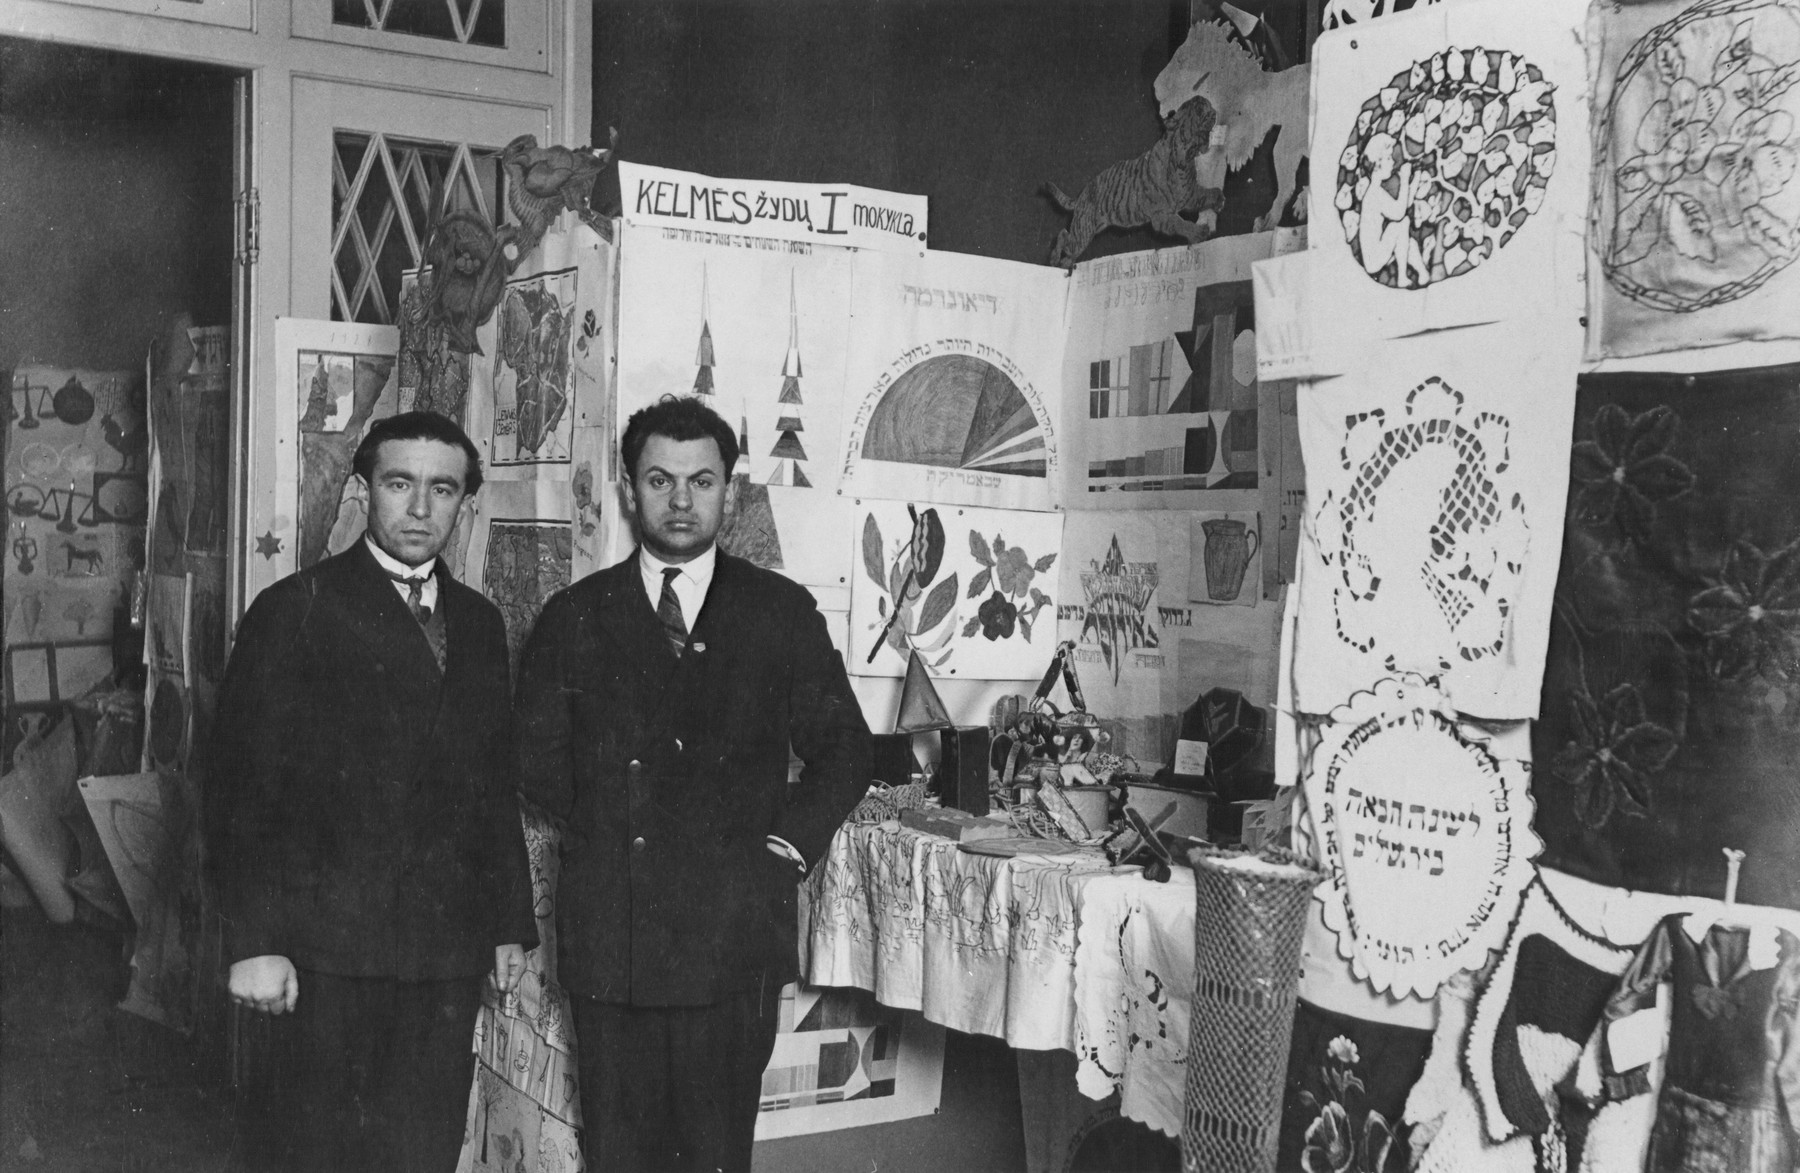 Two teachers from the Jewish Tarbut school in Kovno pose in front of a display of student artwork that was mounted in honor of the school's tenth anniversary.